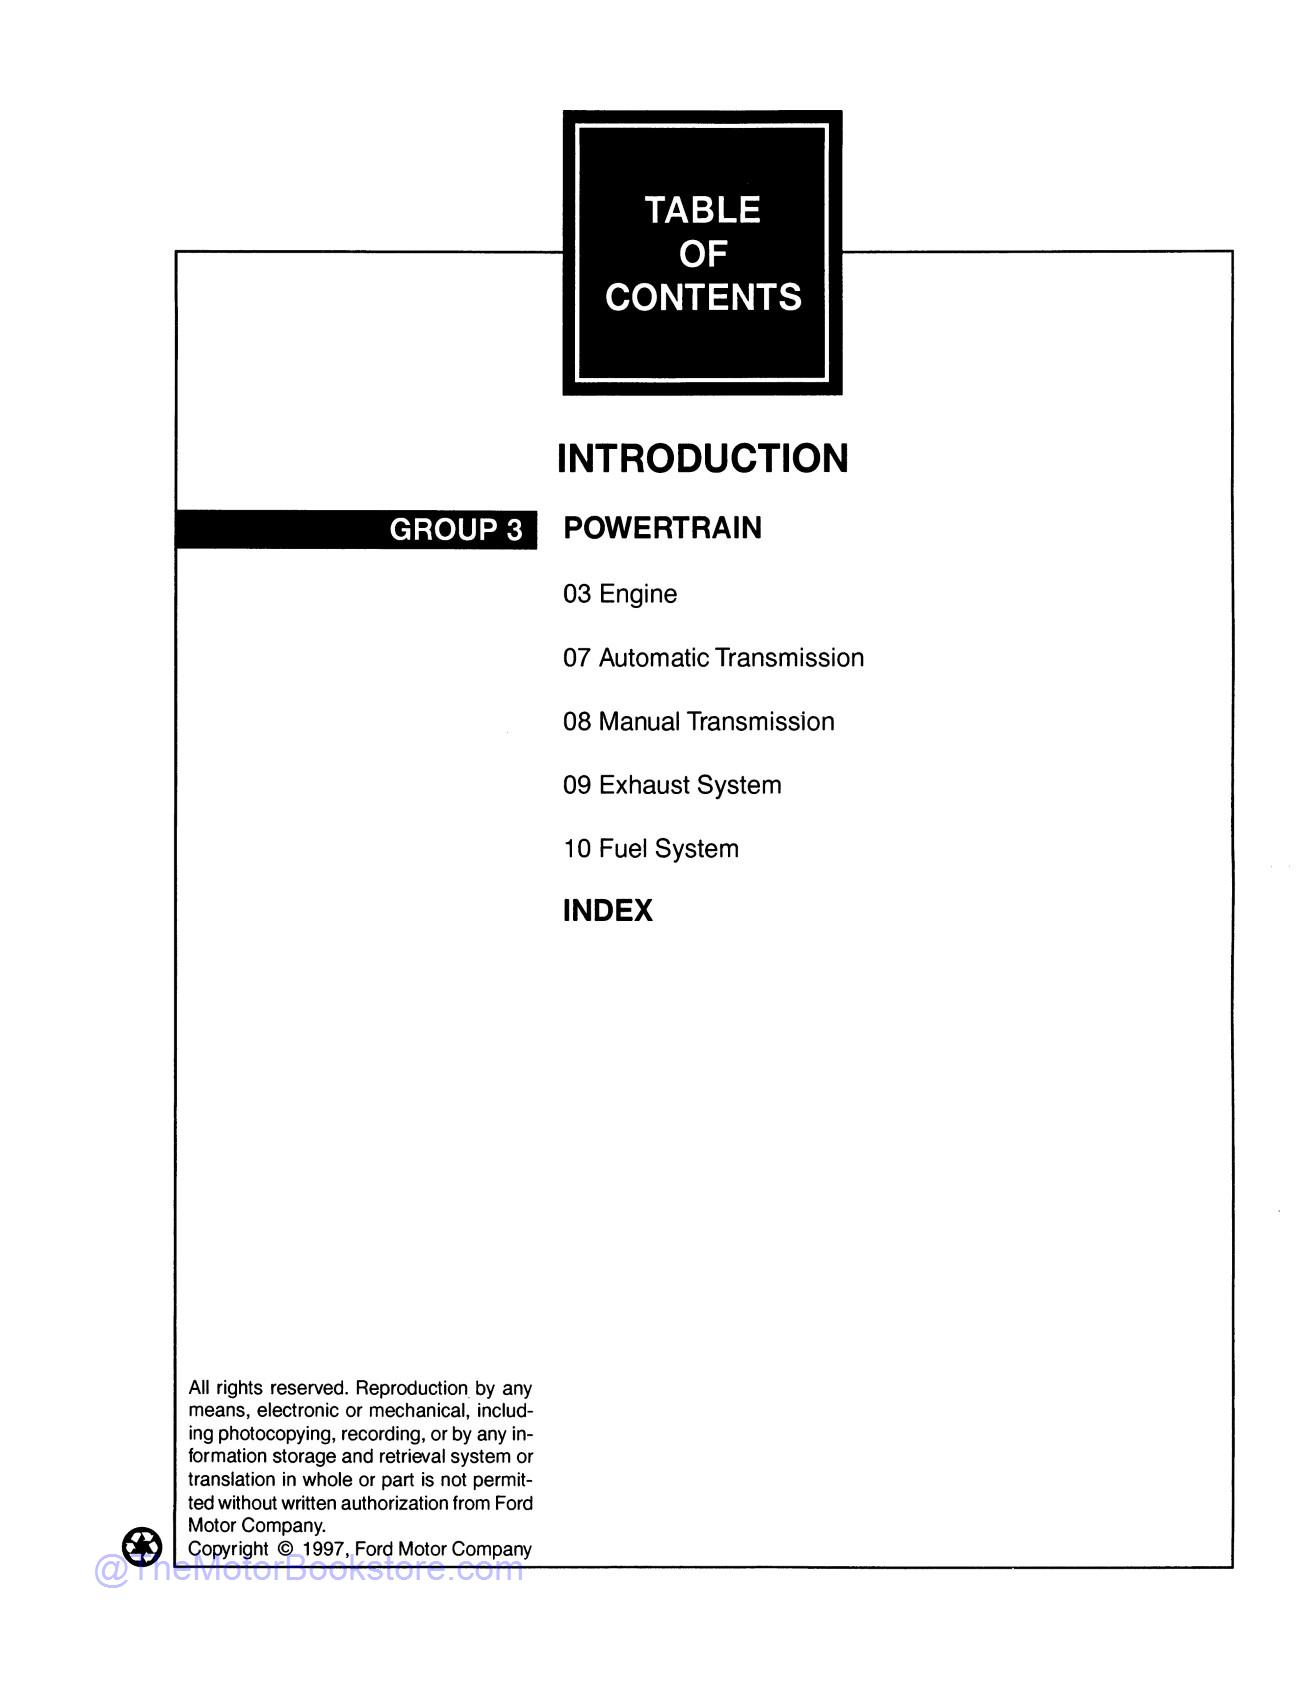 1998 Ford F-150, F-250 Truck Workshop Manual  - Table of Contents 2